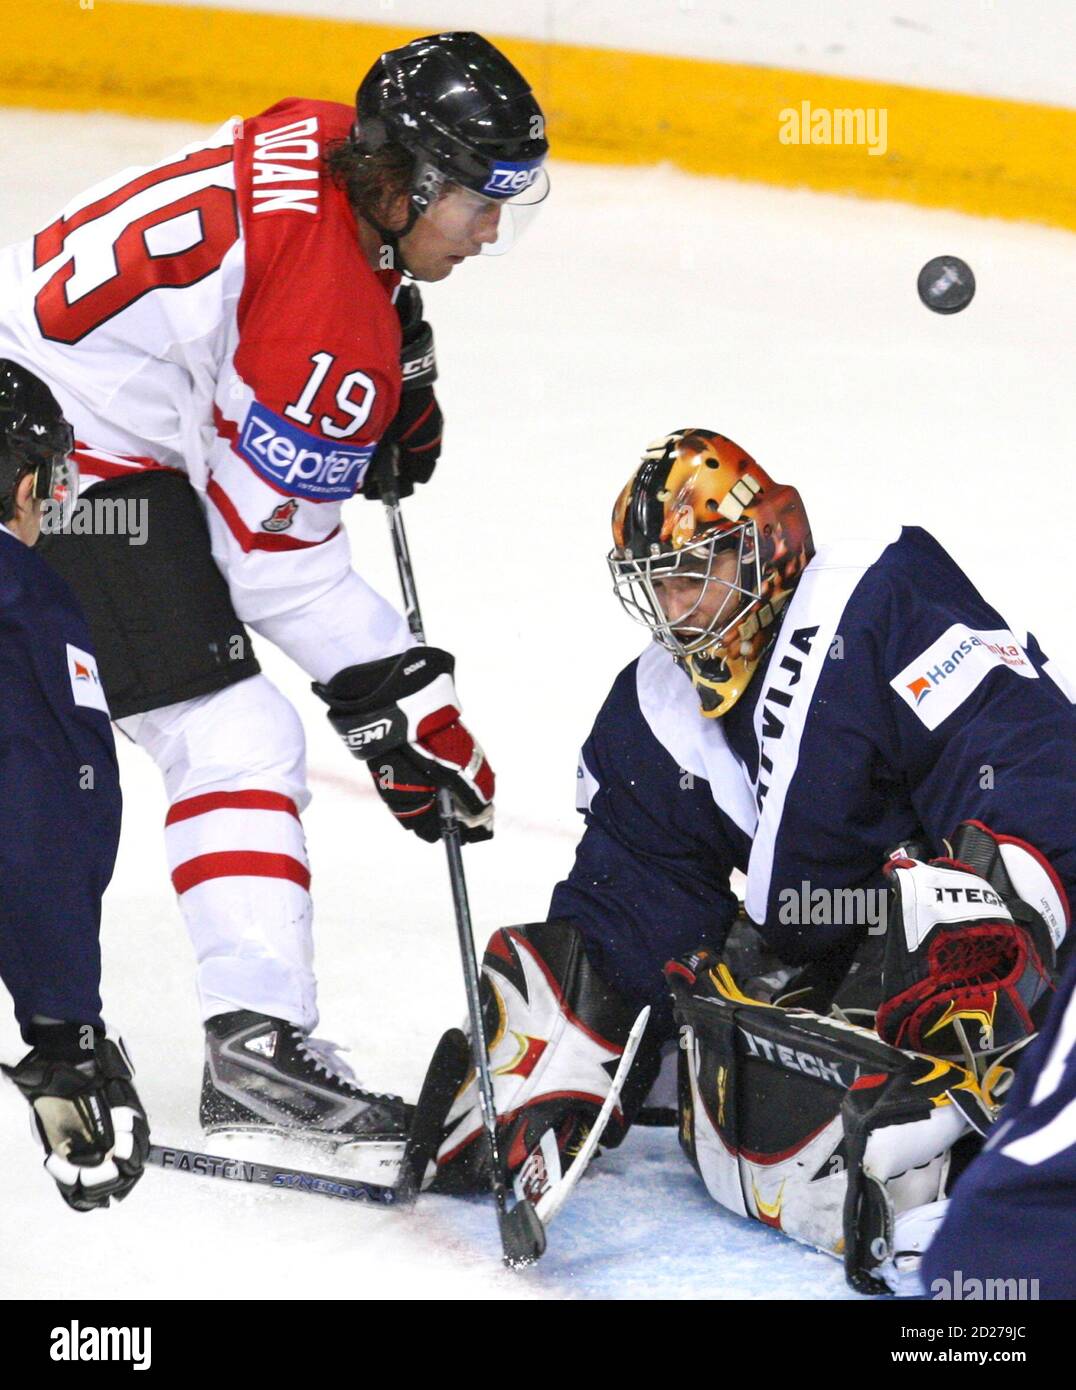 Latvia's goalie Sergejs Naumovs makes a save on Canada's Shane Doan (L)  during the third period